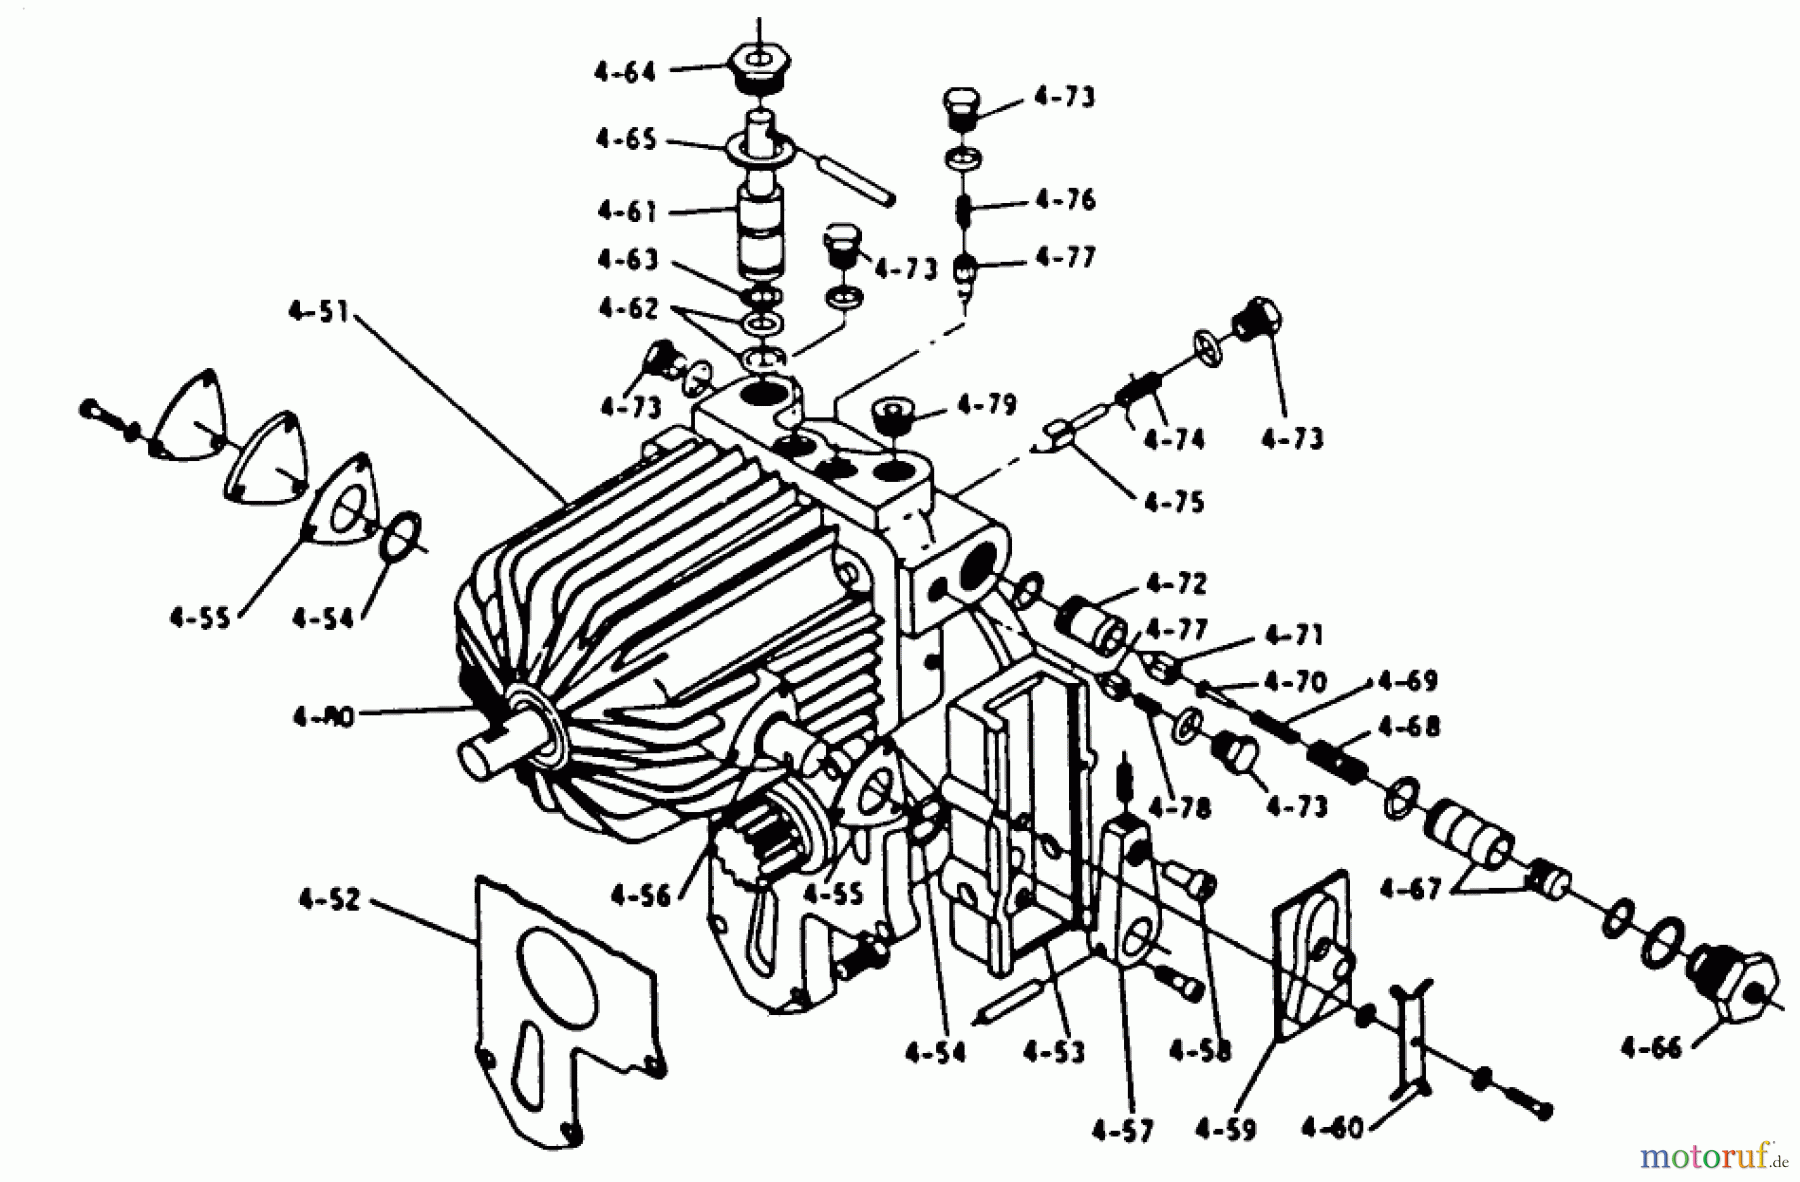  Toro Neu Mowers, Lawn & Garden Tractor Seite 1 1-0475 - Toro 10 hp Automatic Tractor, 1973 PARTS LIST FOR 4.050 HYDROGEAR (PLATE 4.4)